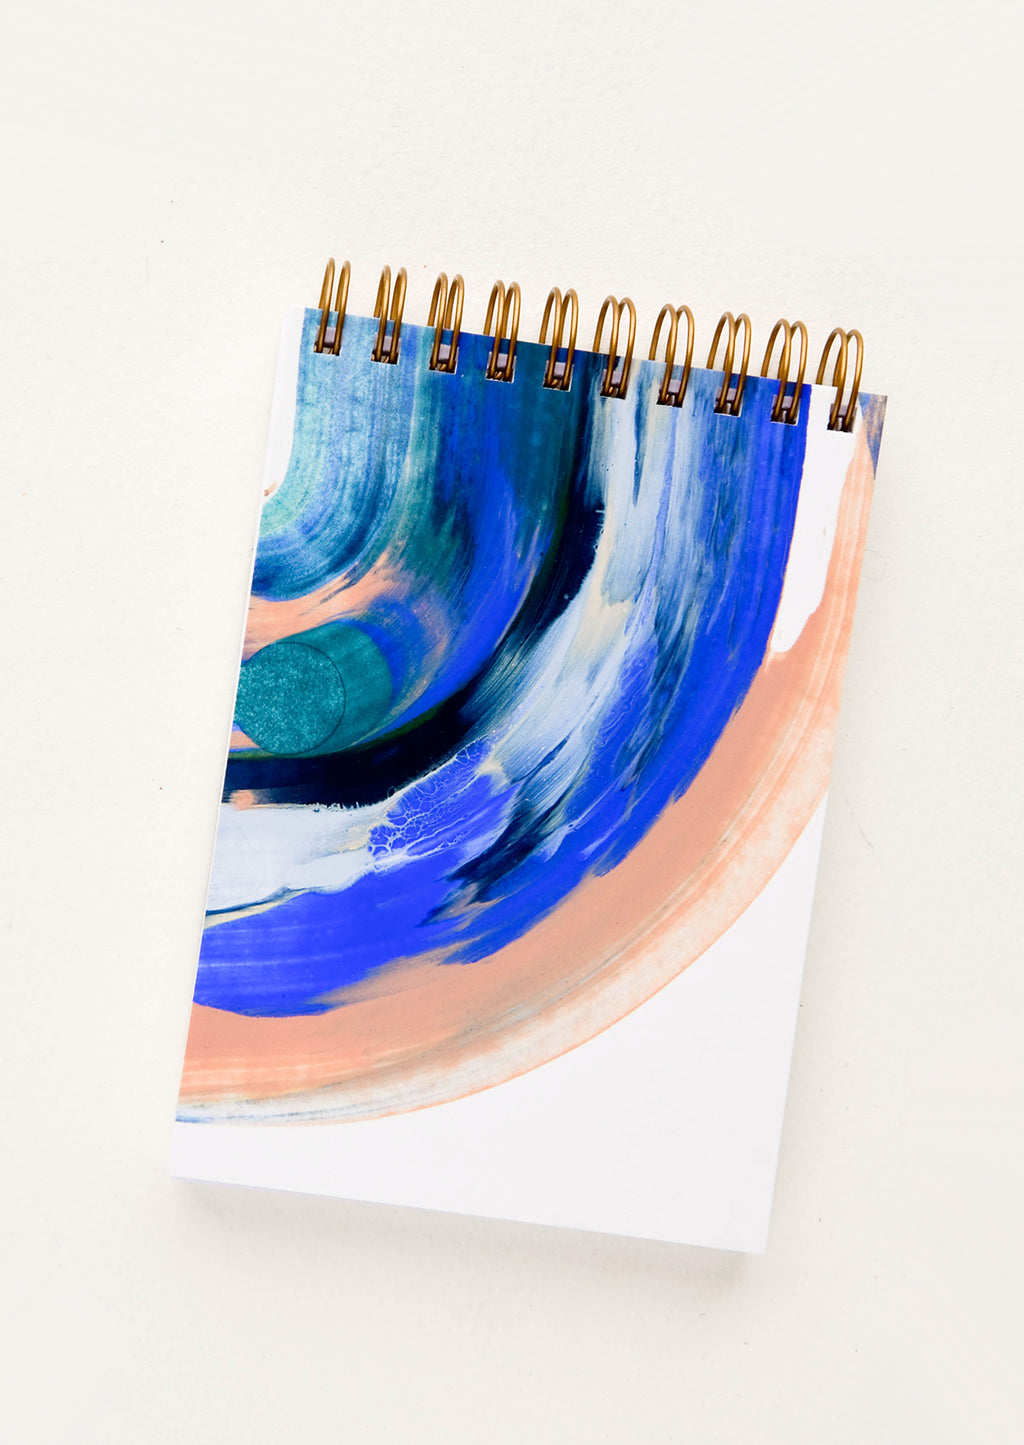 Notepad (Unruled): Pocket-size spiral bound notebook with handpainted cover in blue and peach paint swirl